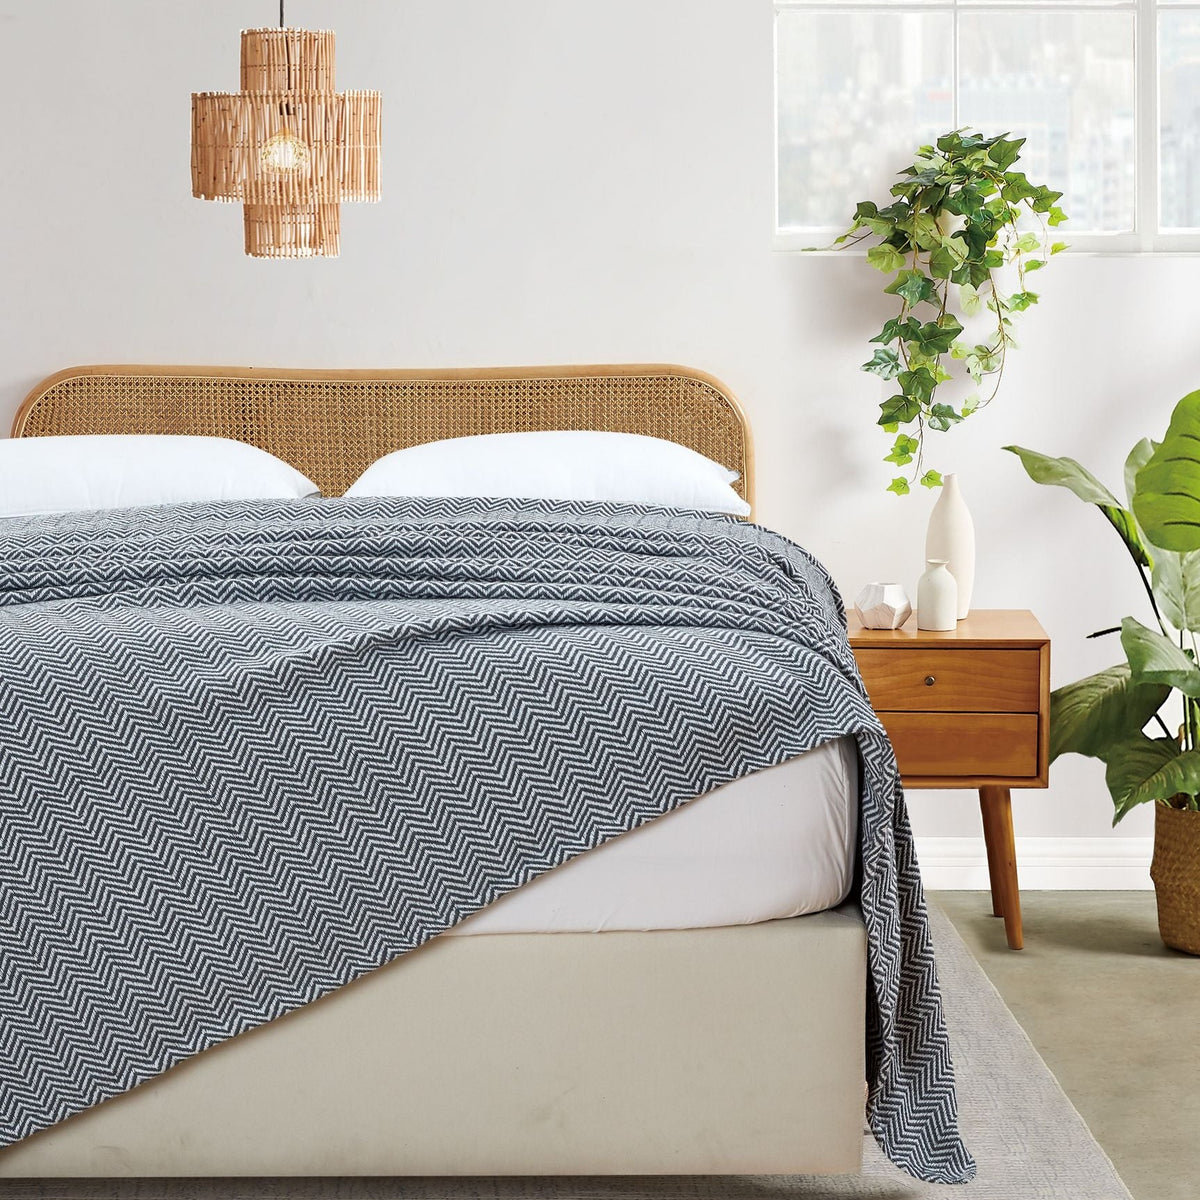 All Products – Laytner's Linen & Home